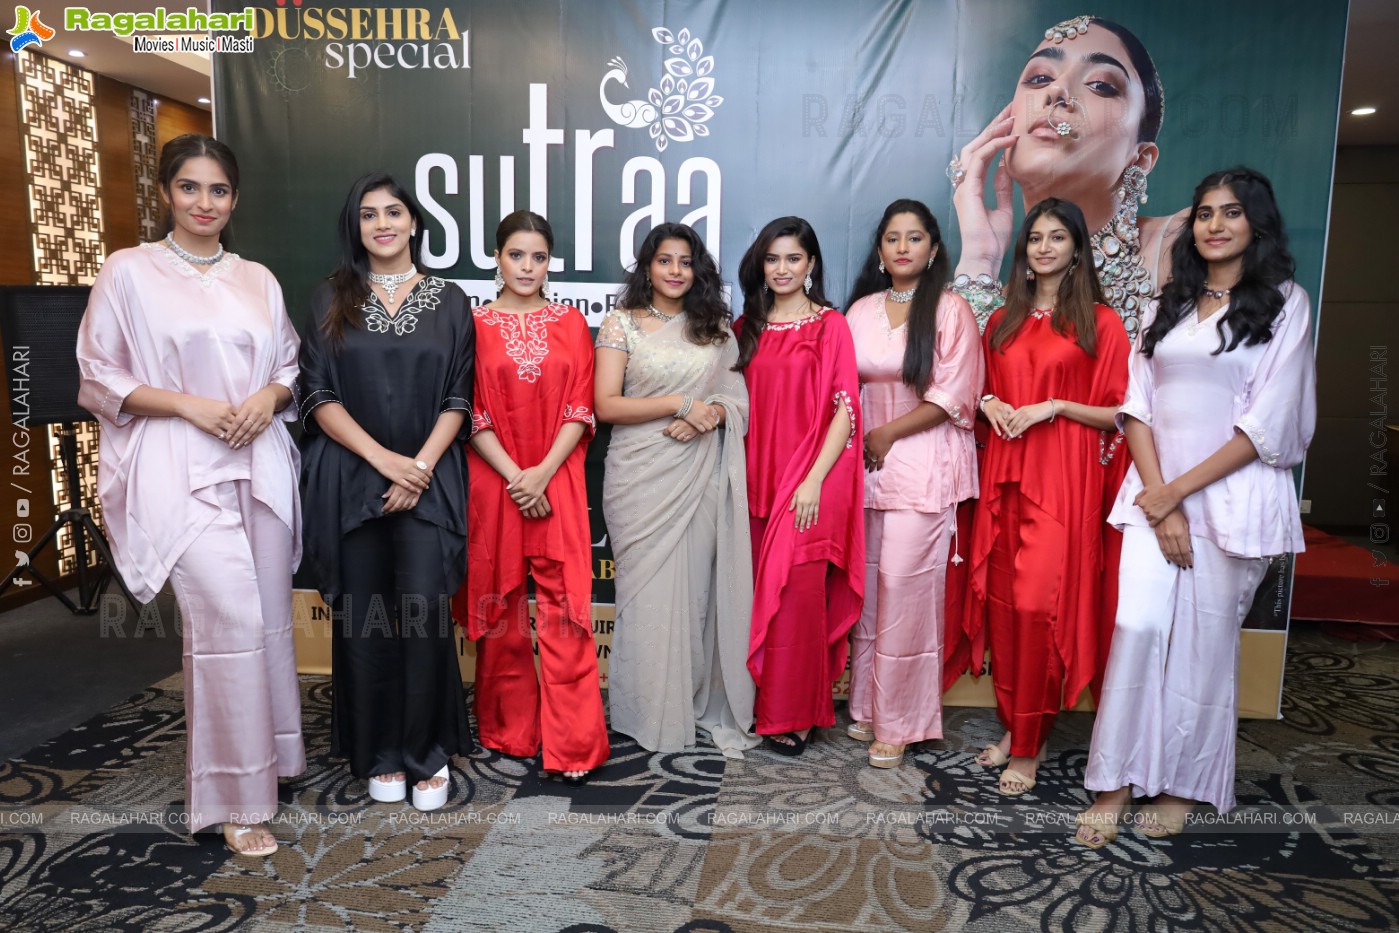 Curtain Raiser Event of Sutraa Exhibition Sep2023 at Hyderabad